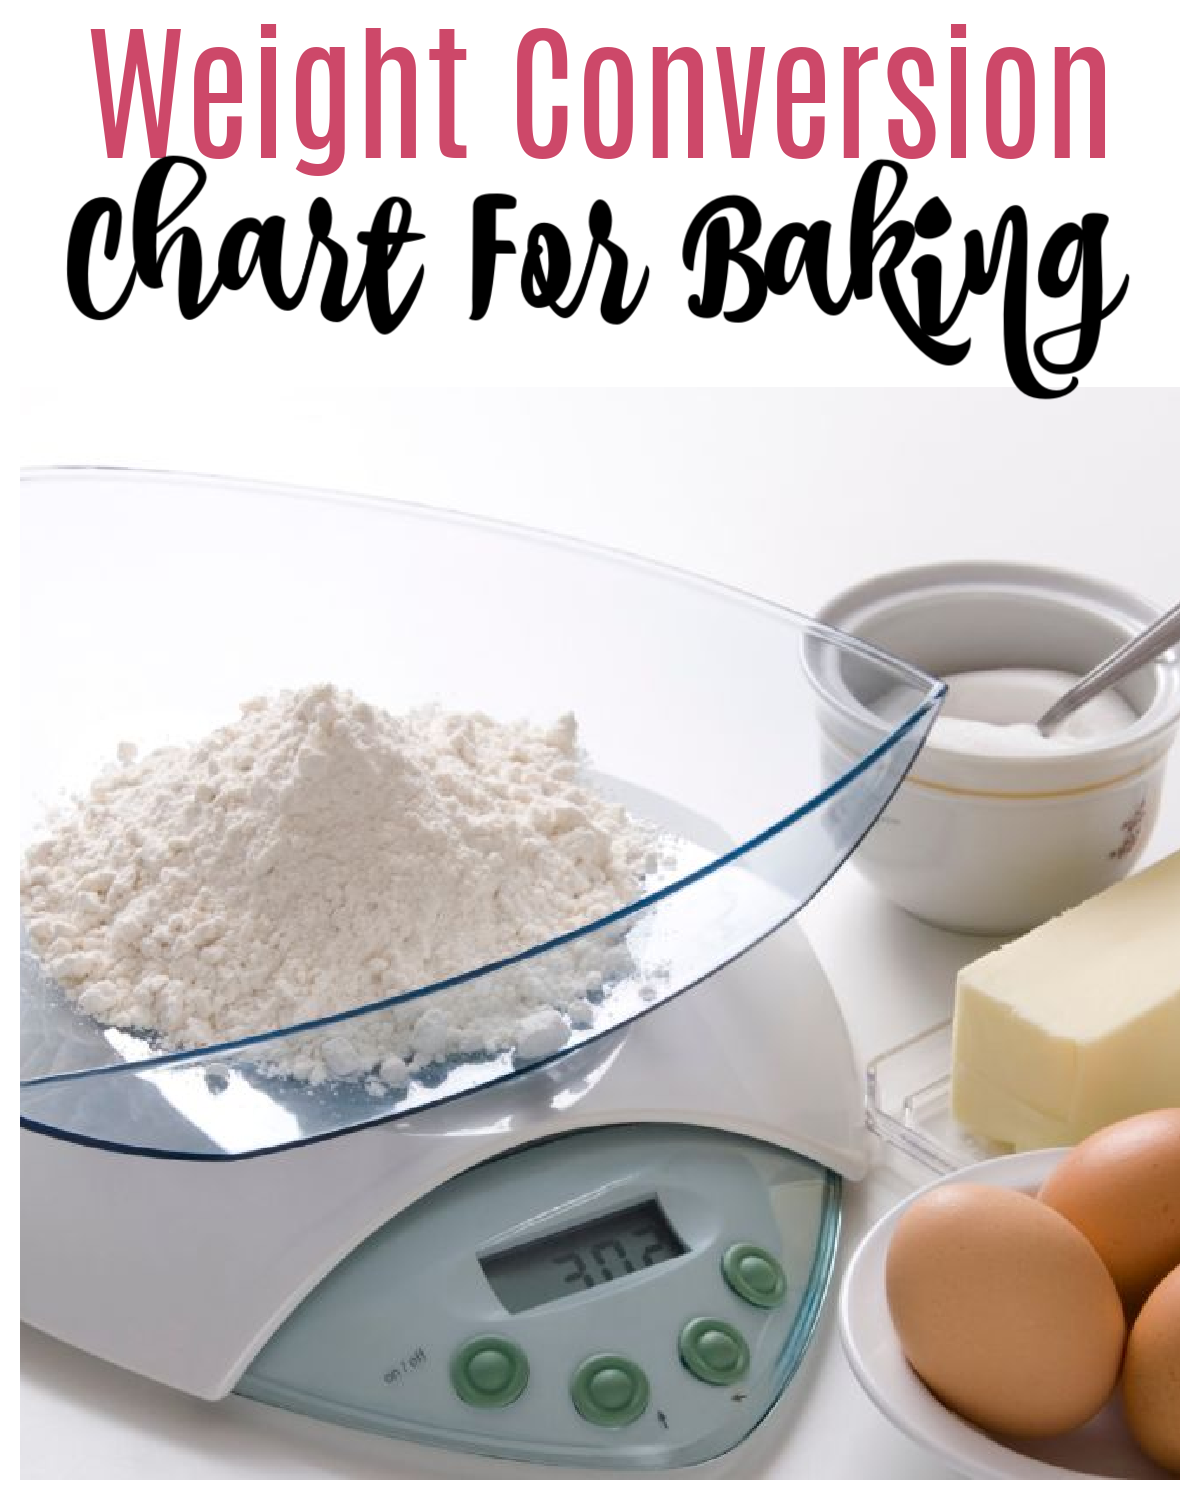 weight conversion chart for baking image